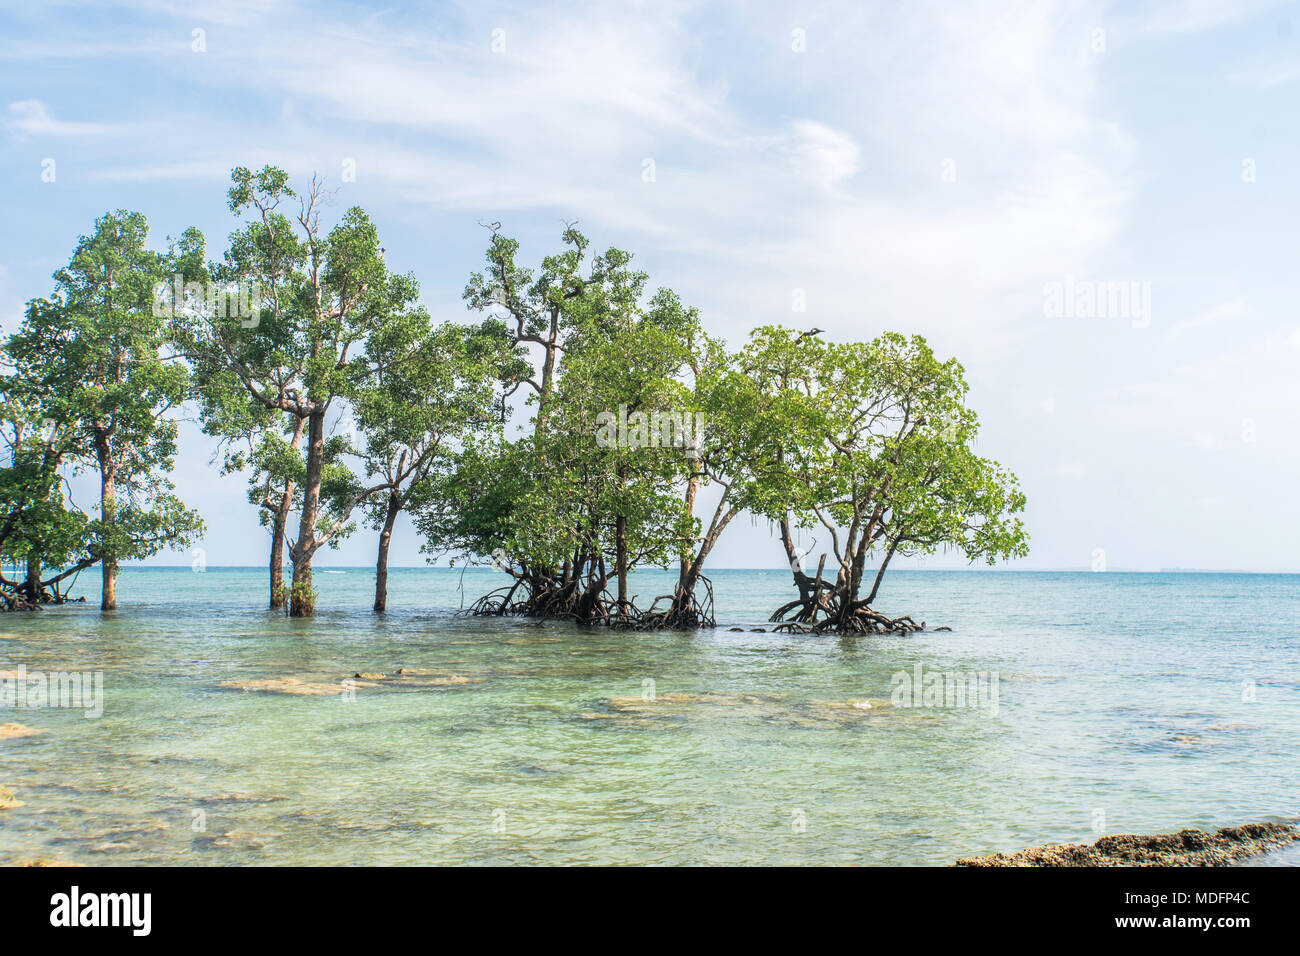 Mangrove forest in the tropical place. Beautiful wildlife scenery. Clear blue turquoise water, clear beach cloudy sky. Andaman and Nicobar islands. lo Stock Photo